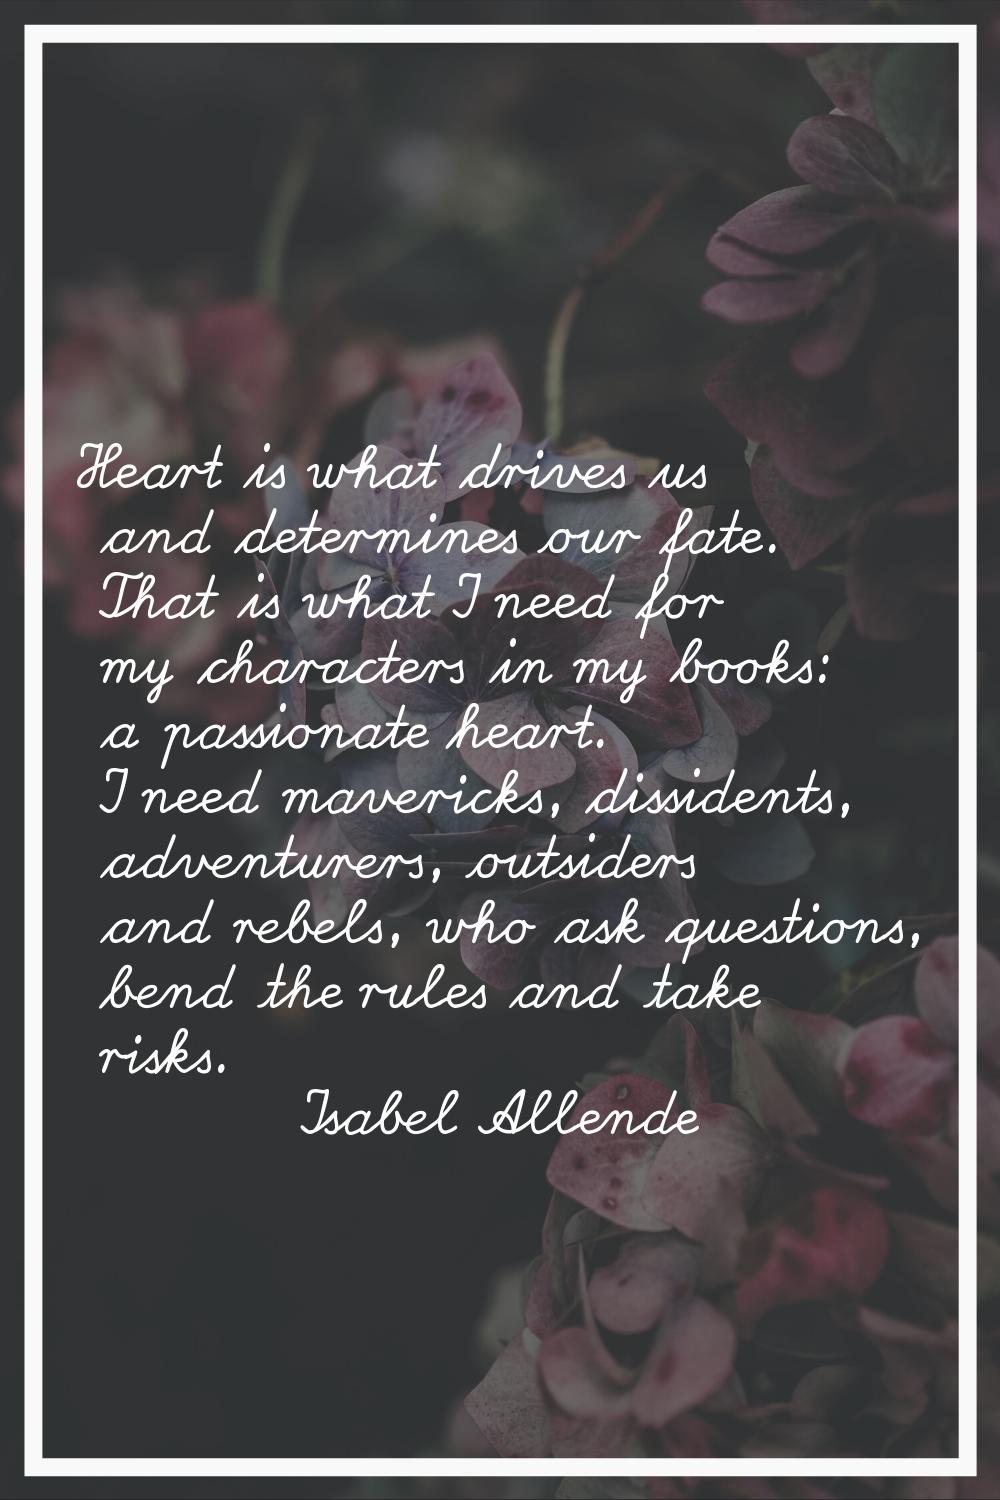 Heart is what drives us and determines our fate. That is what I need for my characters in my books: